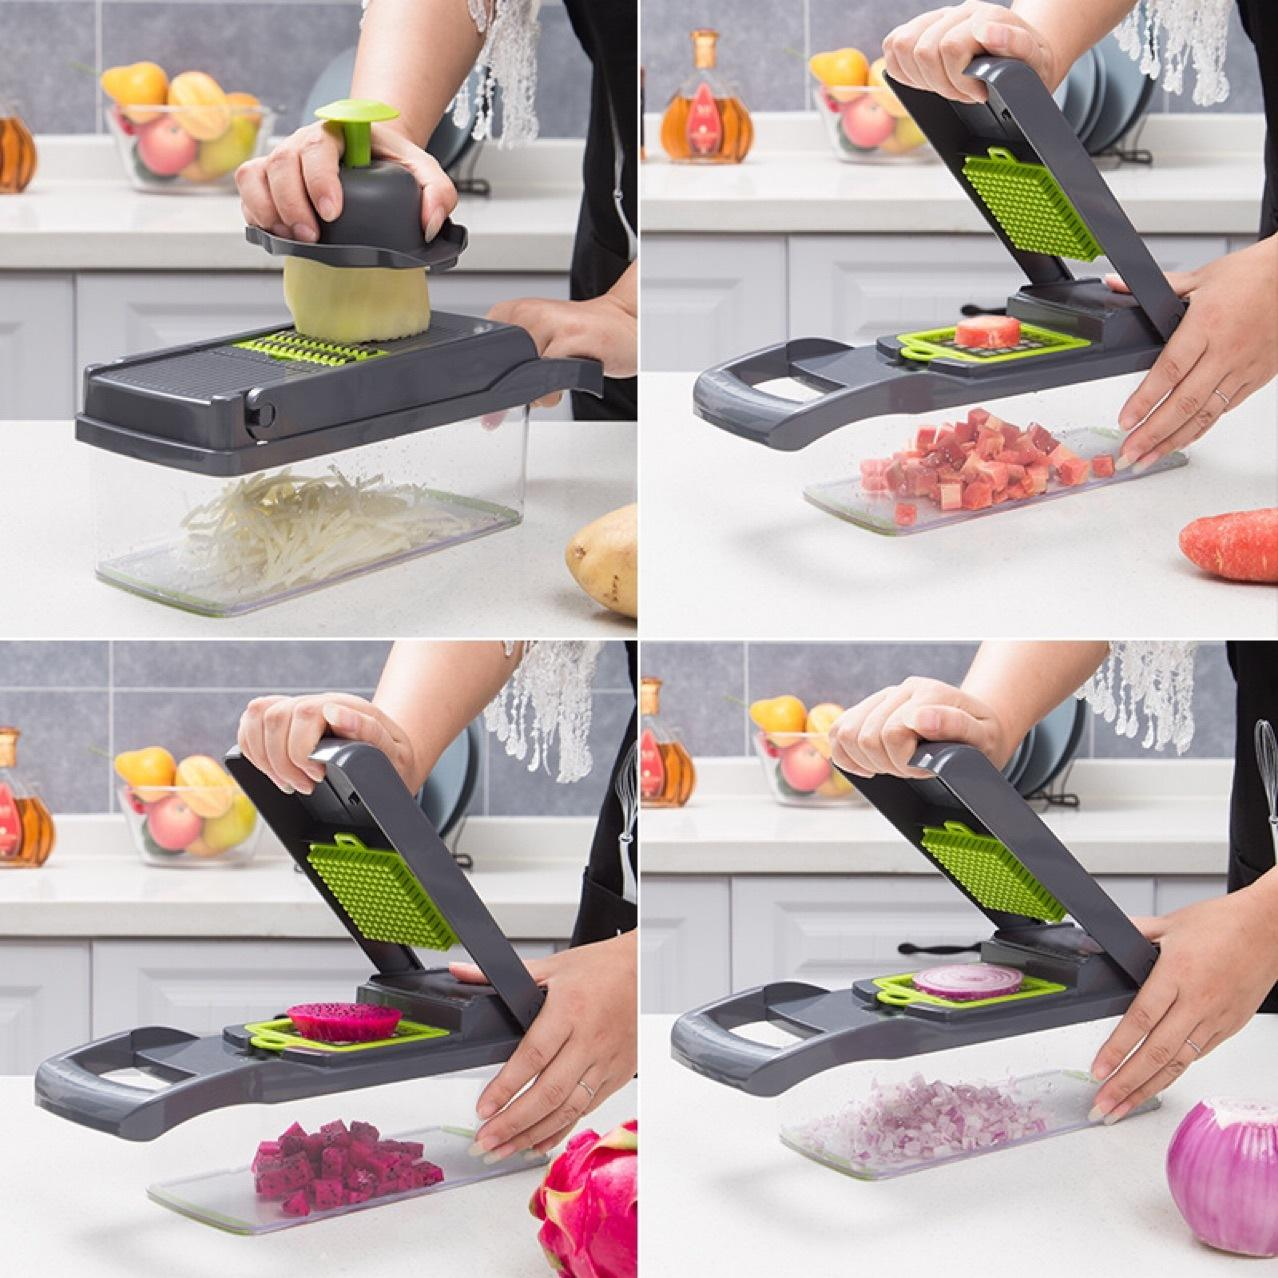 Easy Chopper - Prepare healthy meals in no time!